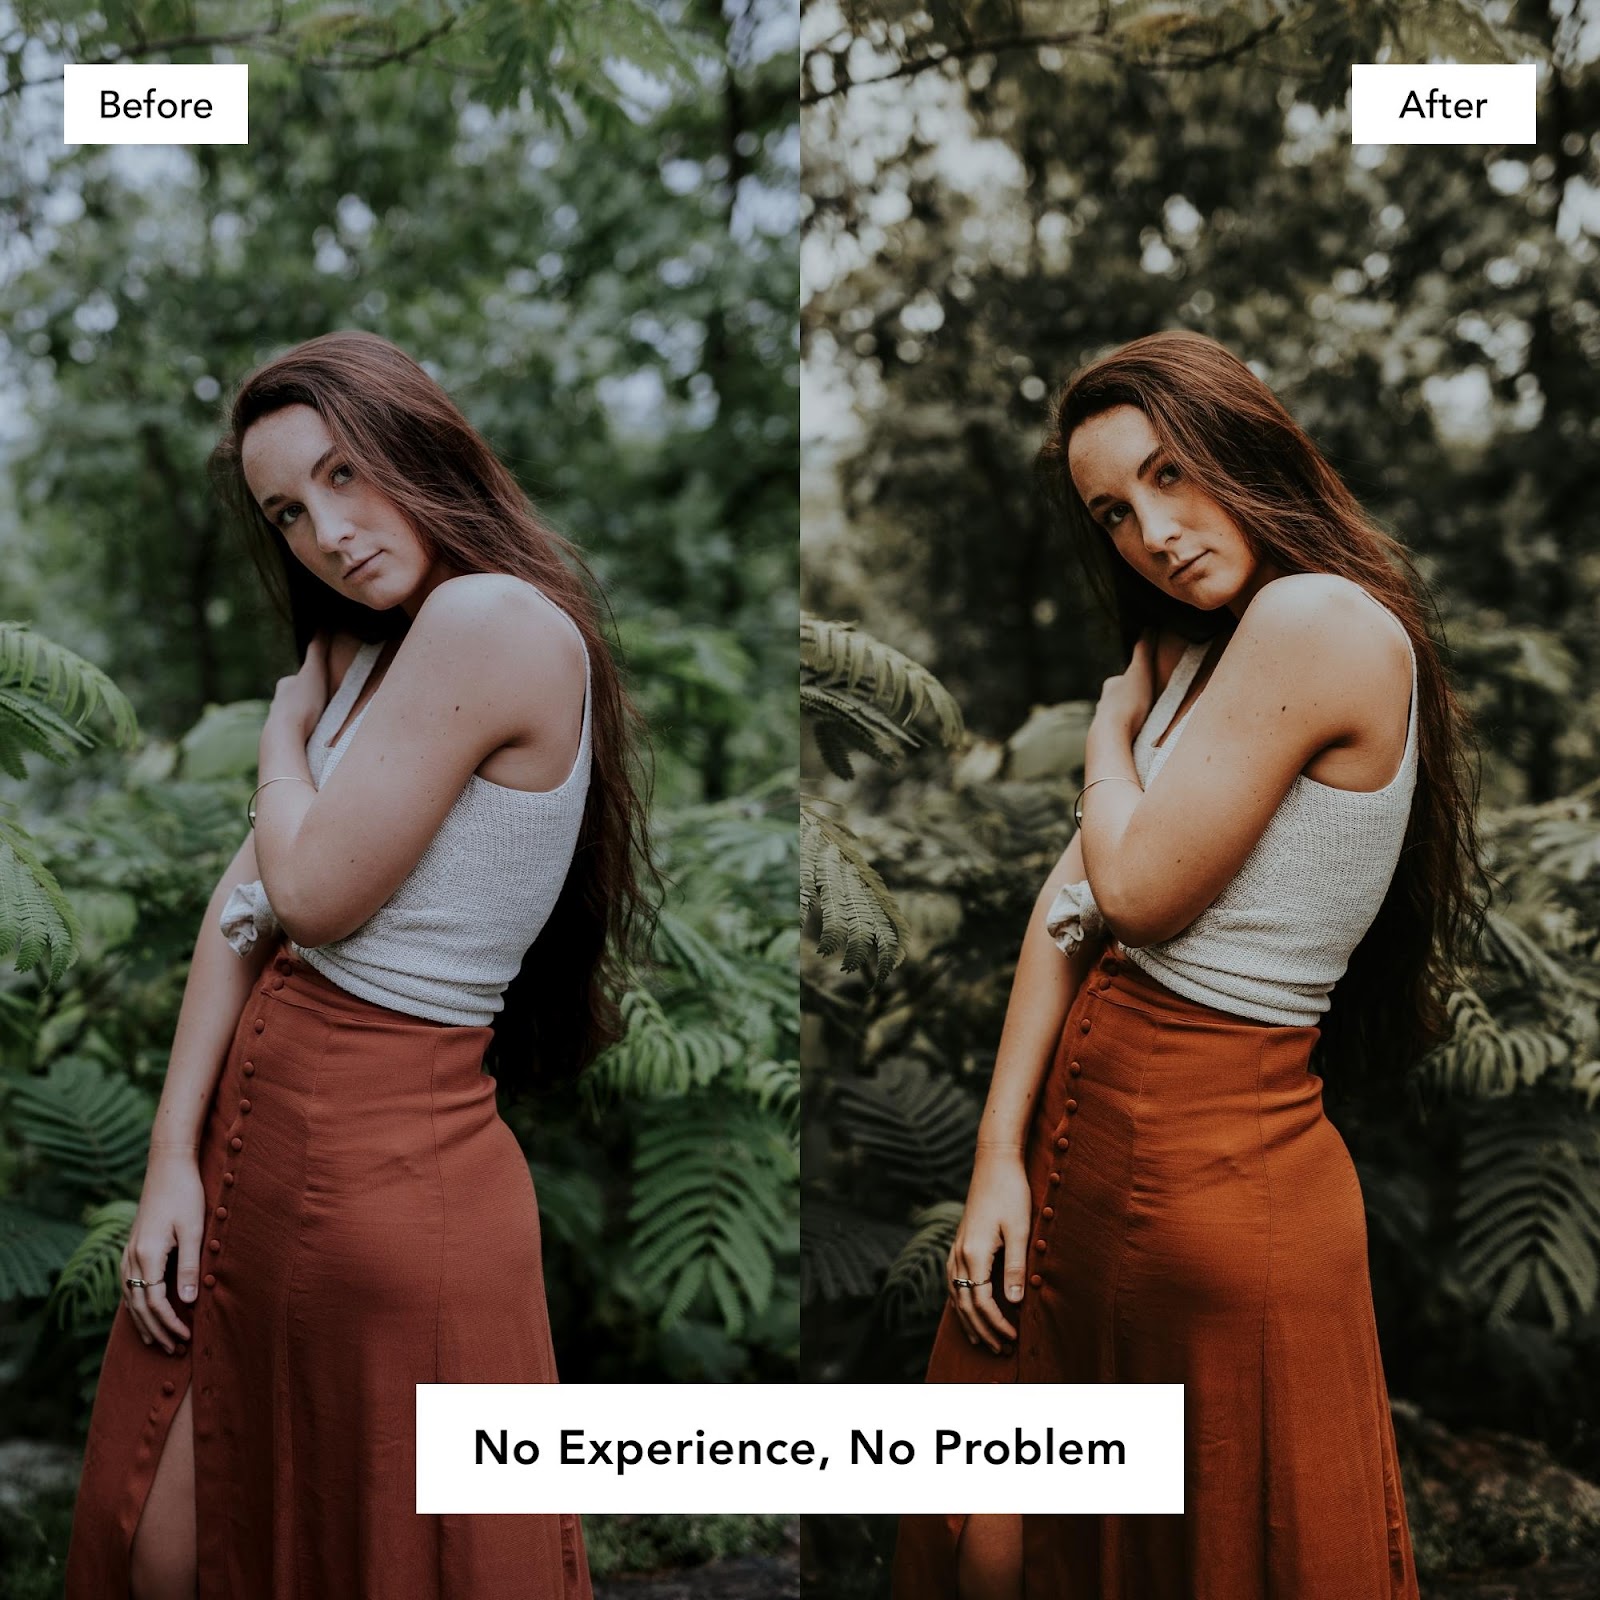 moody flourish presets cover grid before after